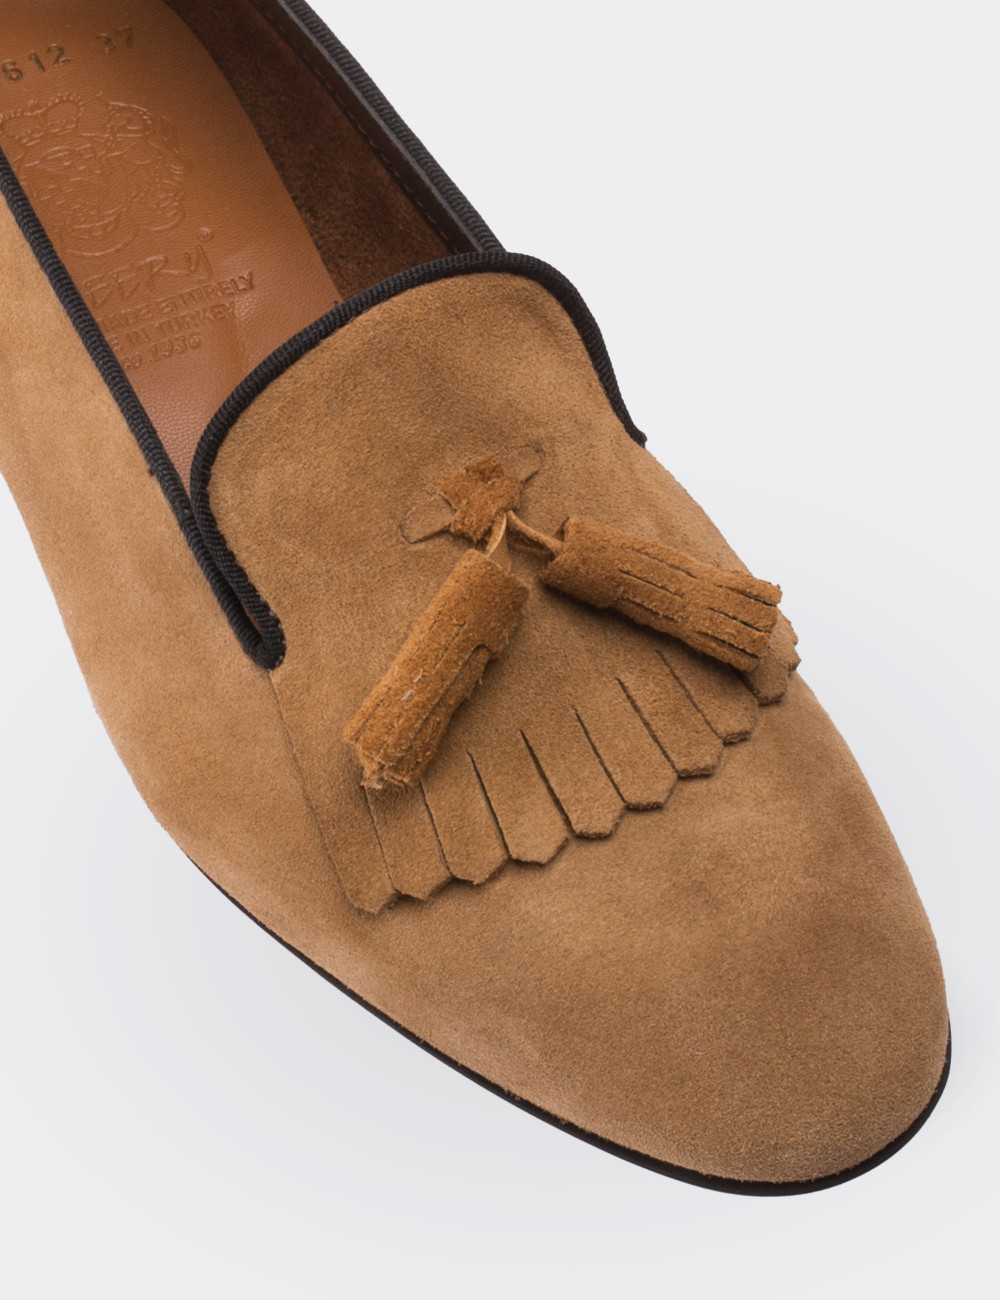 Tan Suede Leather Loafers - 01612ZTBAM01